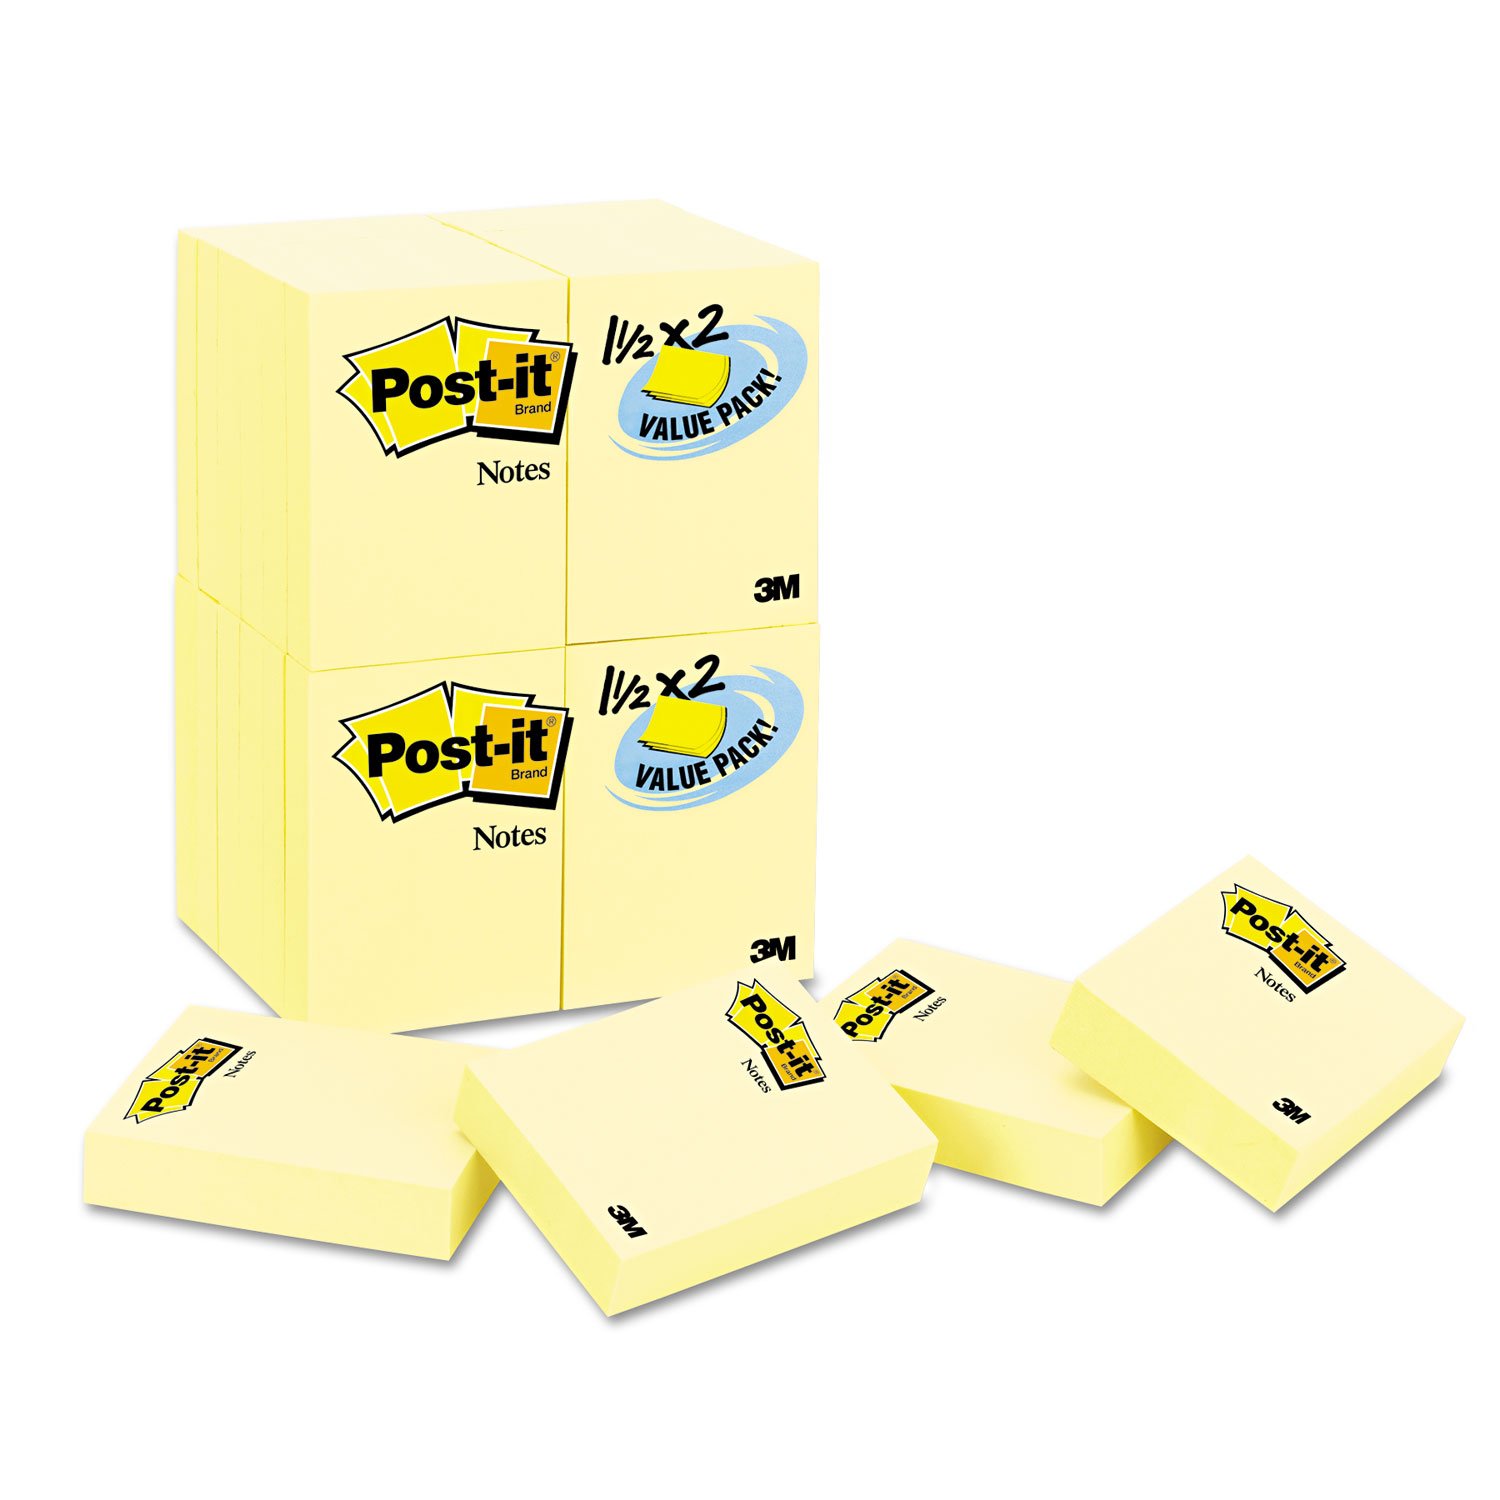 Book Cover Post-it Mini Notes, 1.5 in x 2 in, 24 Pads, America #1 Favorite Sticky Notes, Canary Yellow, Clean Removal, Recyclable (653-24VAD-B)